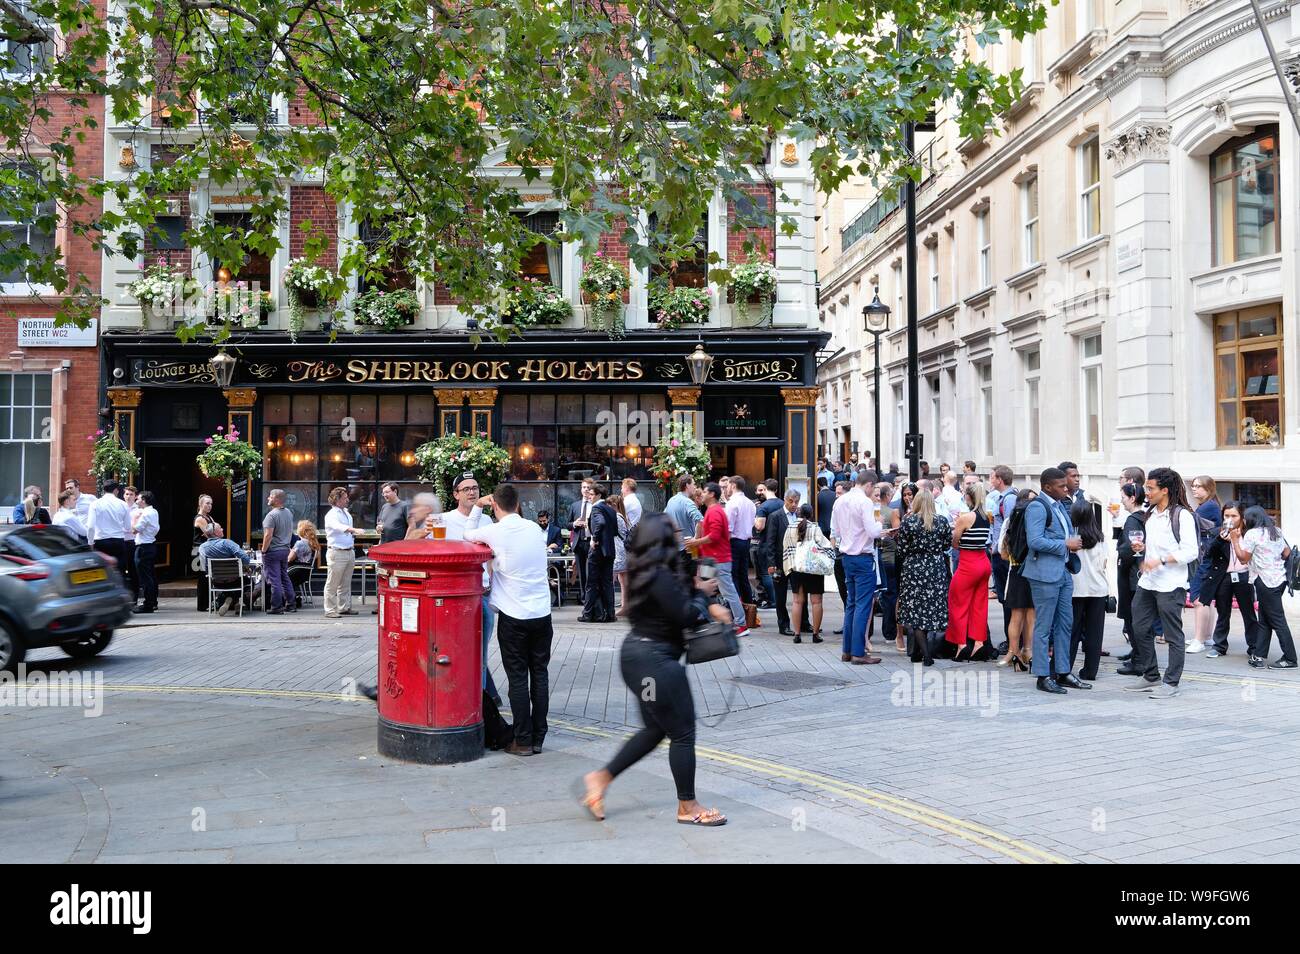 Crowds enjoying a summers evening drink outside The Sherlock Holmes  public house on Northumberland Street, Central London England UK Stock Photo